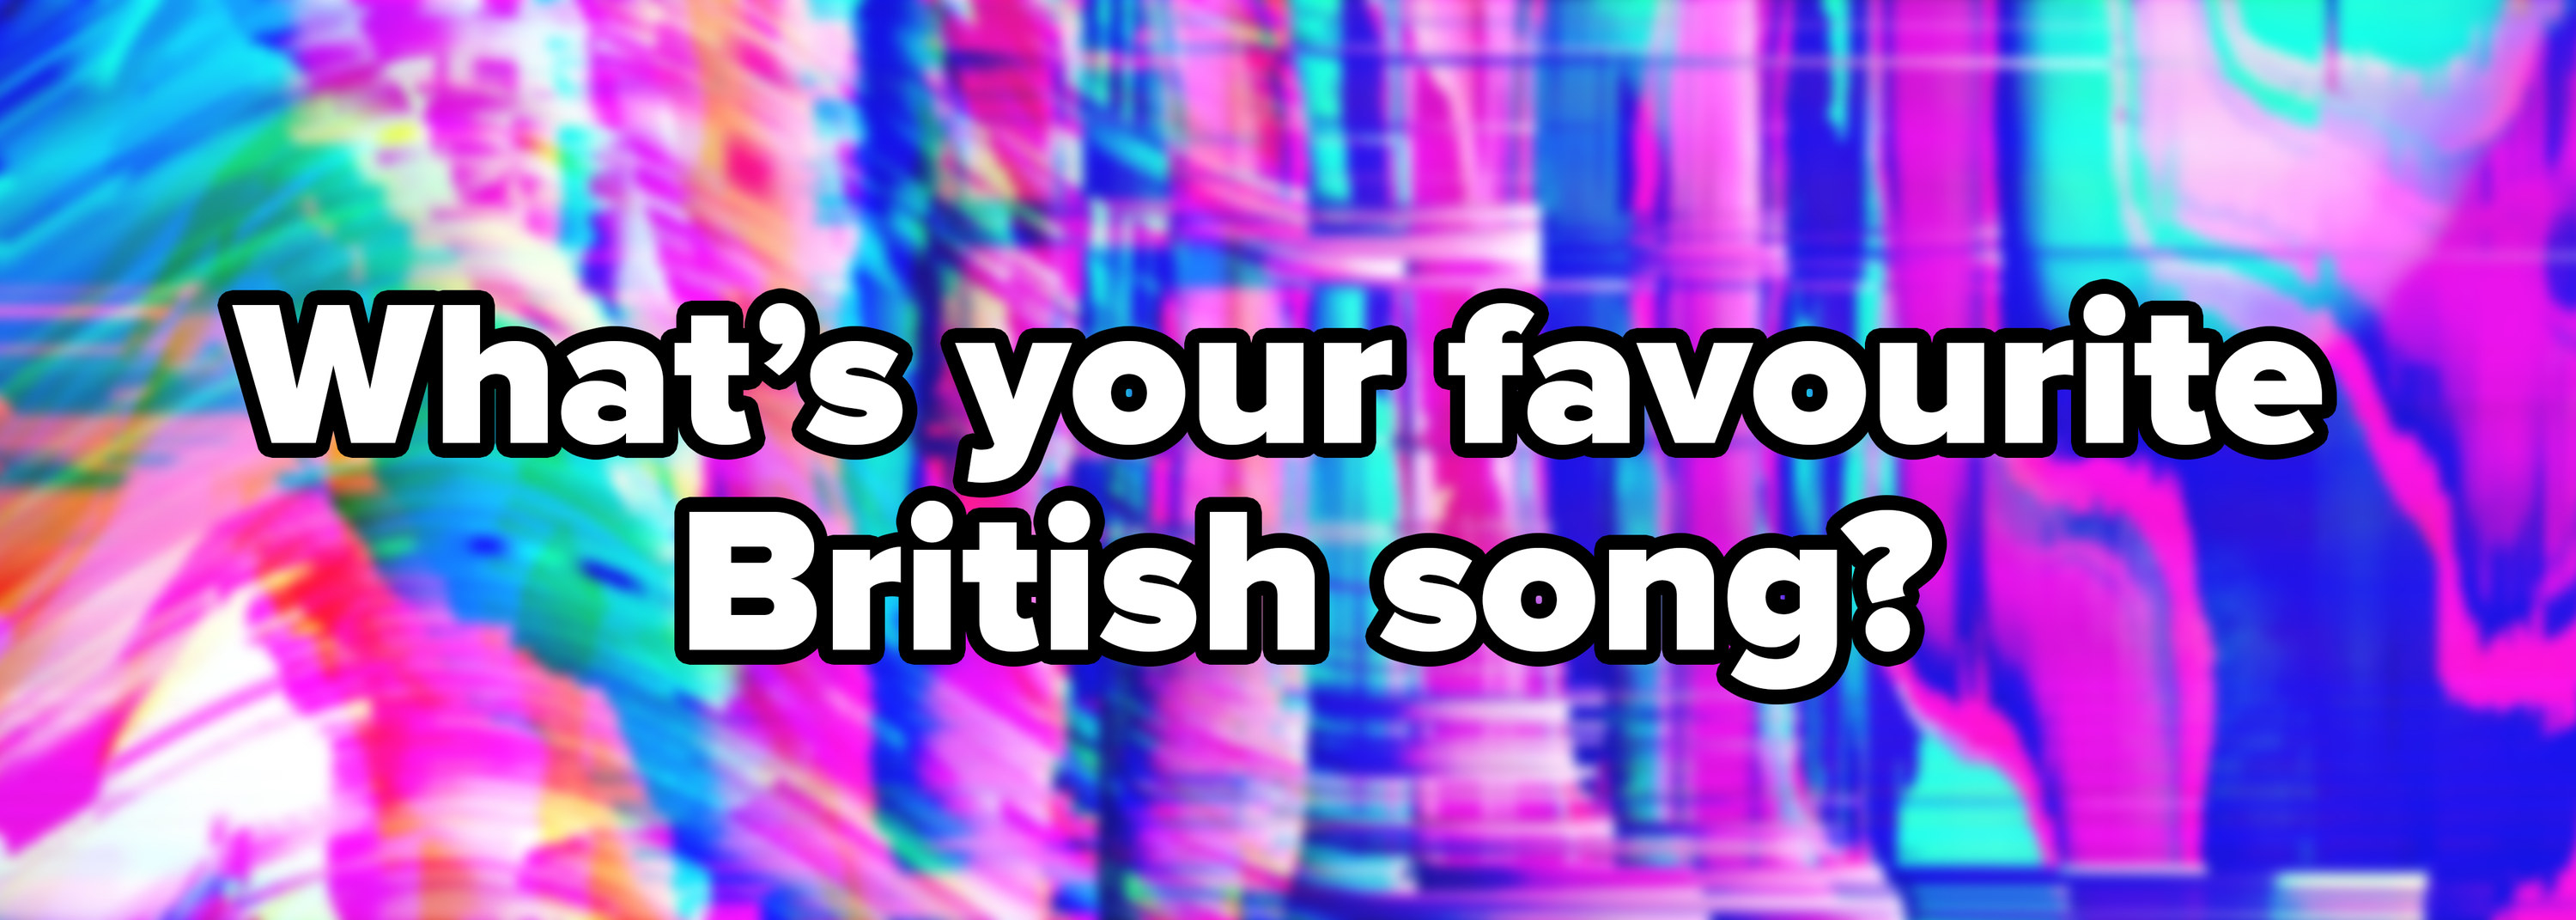 Abstract pink blue mint neon psychedelic background with the question What&#x27;s your favourite British song written on top